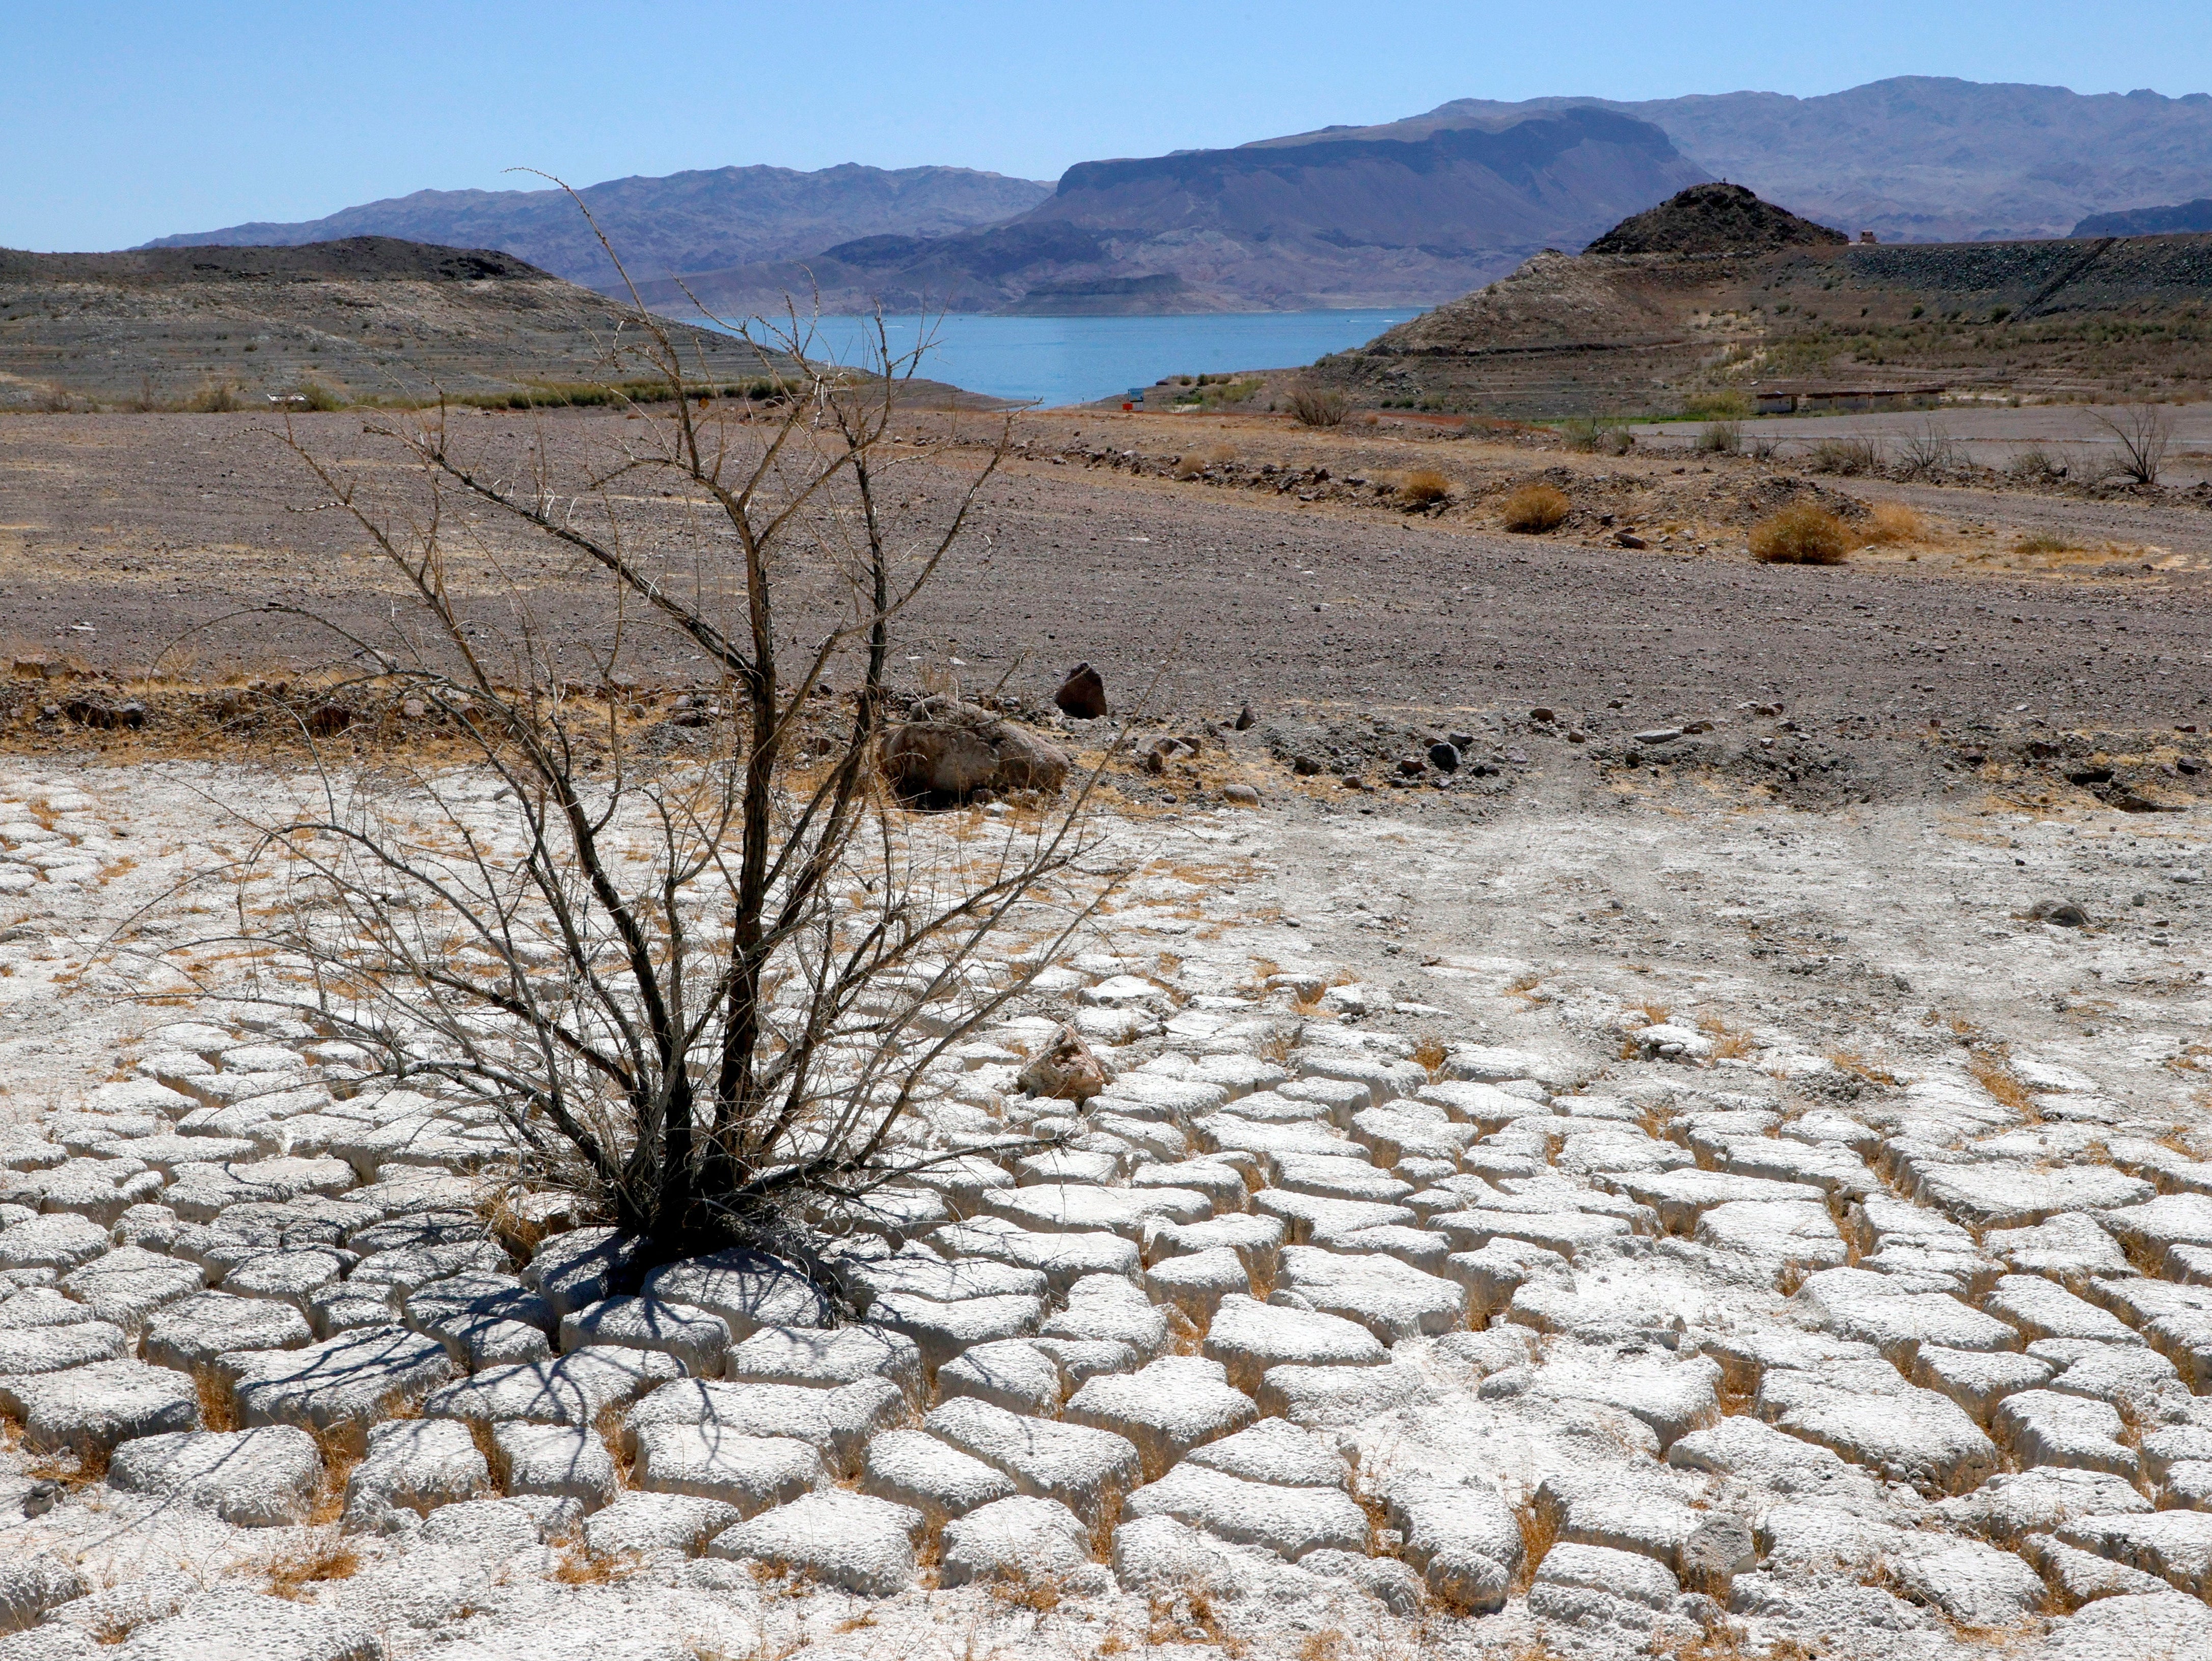 Lake Mead is seen in the distance behind a dead creosote bush in an area of dry, cracked earth that used to be underwater